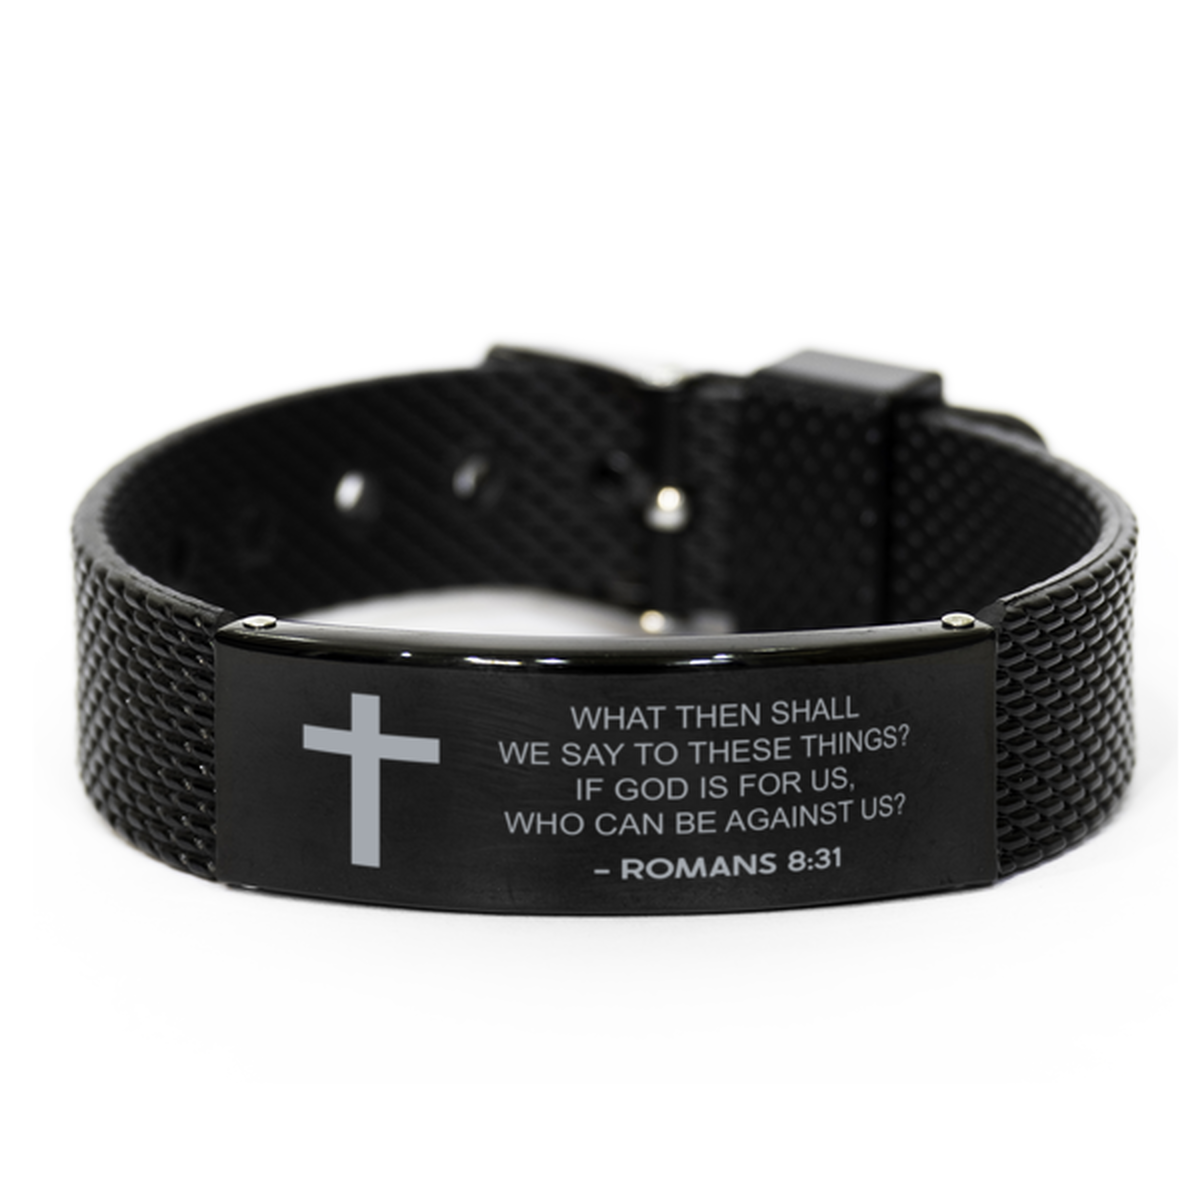 Christian Black Bracelet,, Romans 8:31 What Then Shall We Say To These Things? If God Is, Motivational Bible Verse Gifts For Men Women